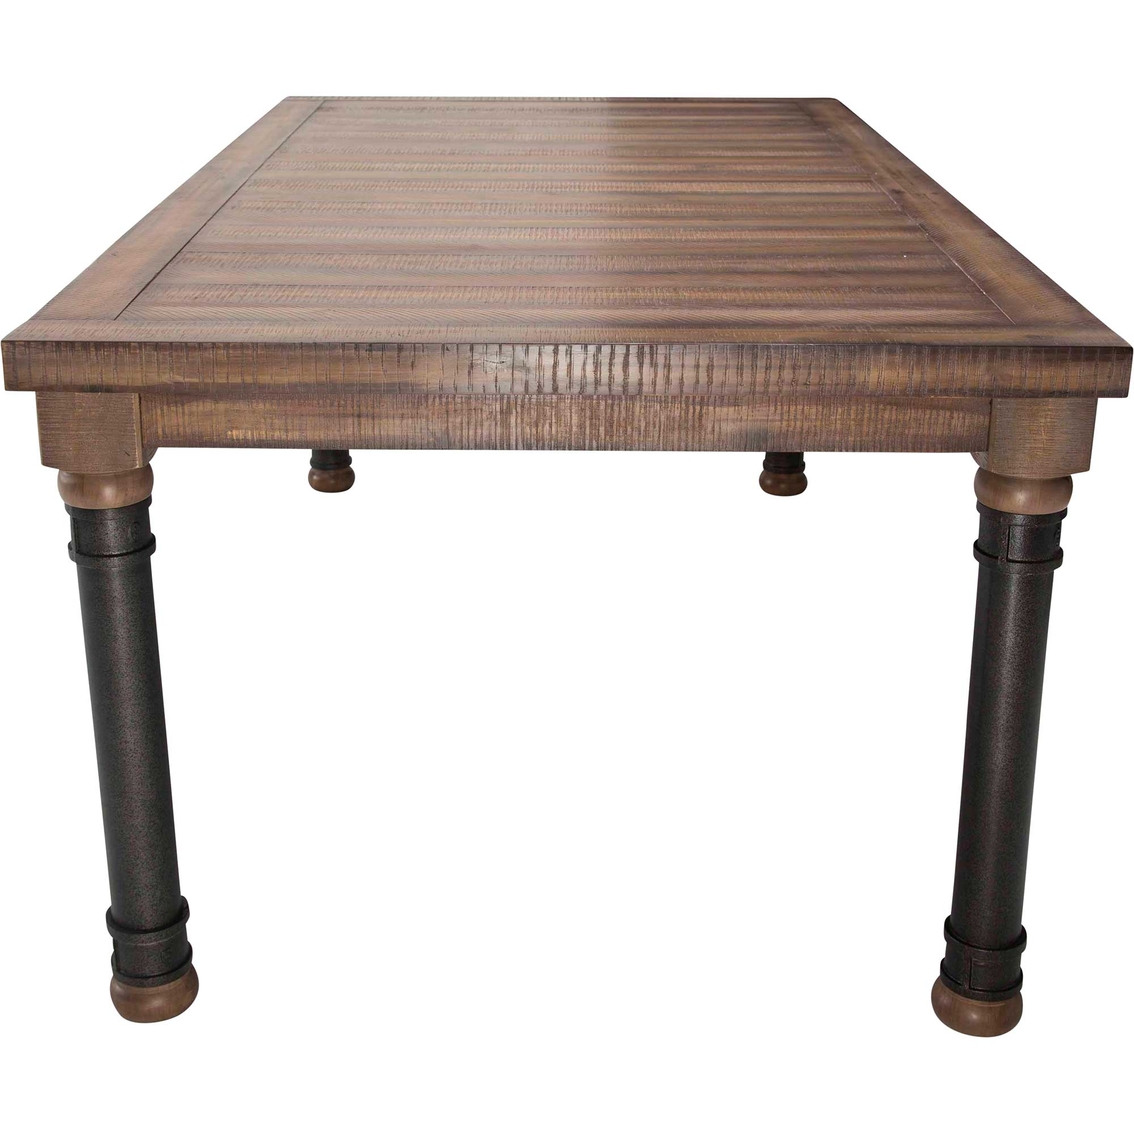 Kathy Ireland Home Crossings Rectangular Dining Table - Image 3 of 8